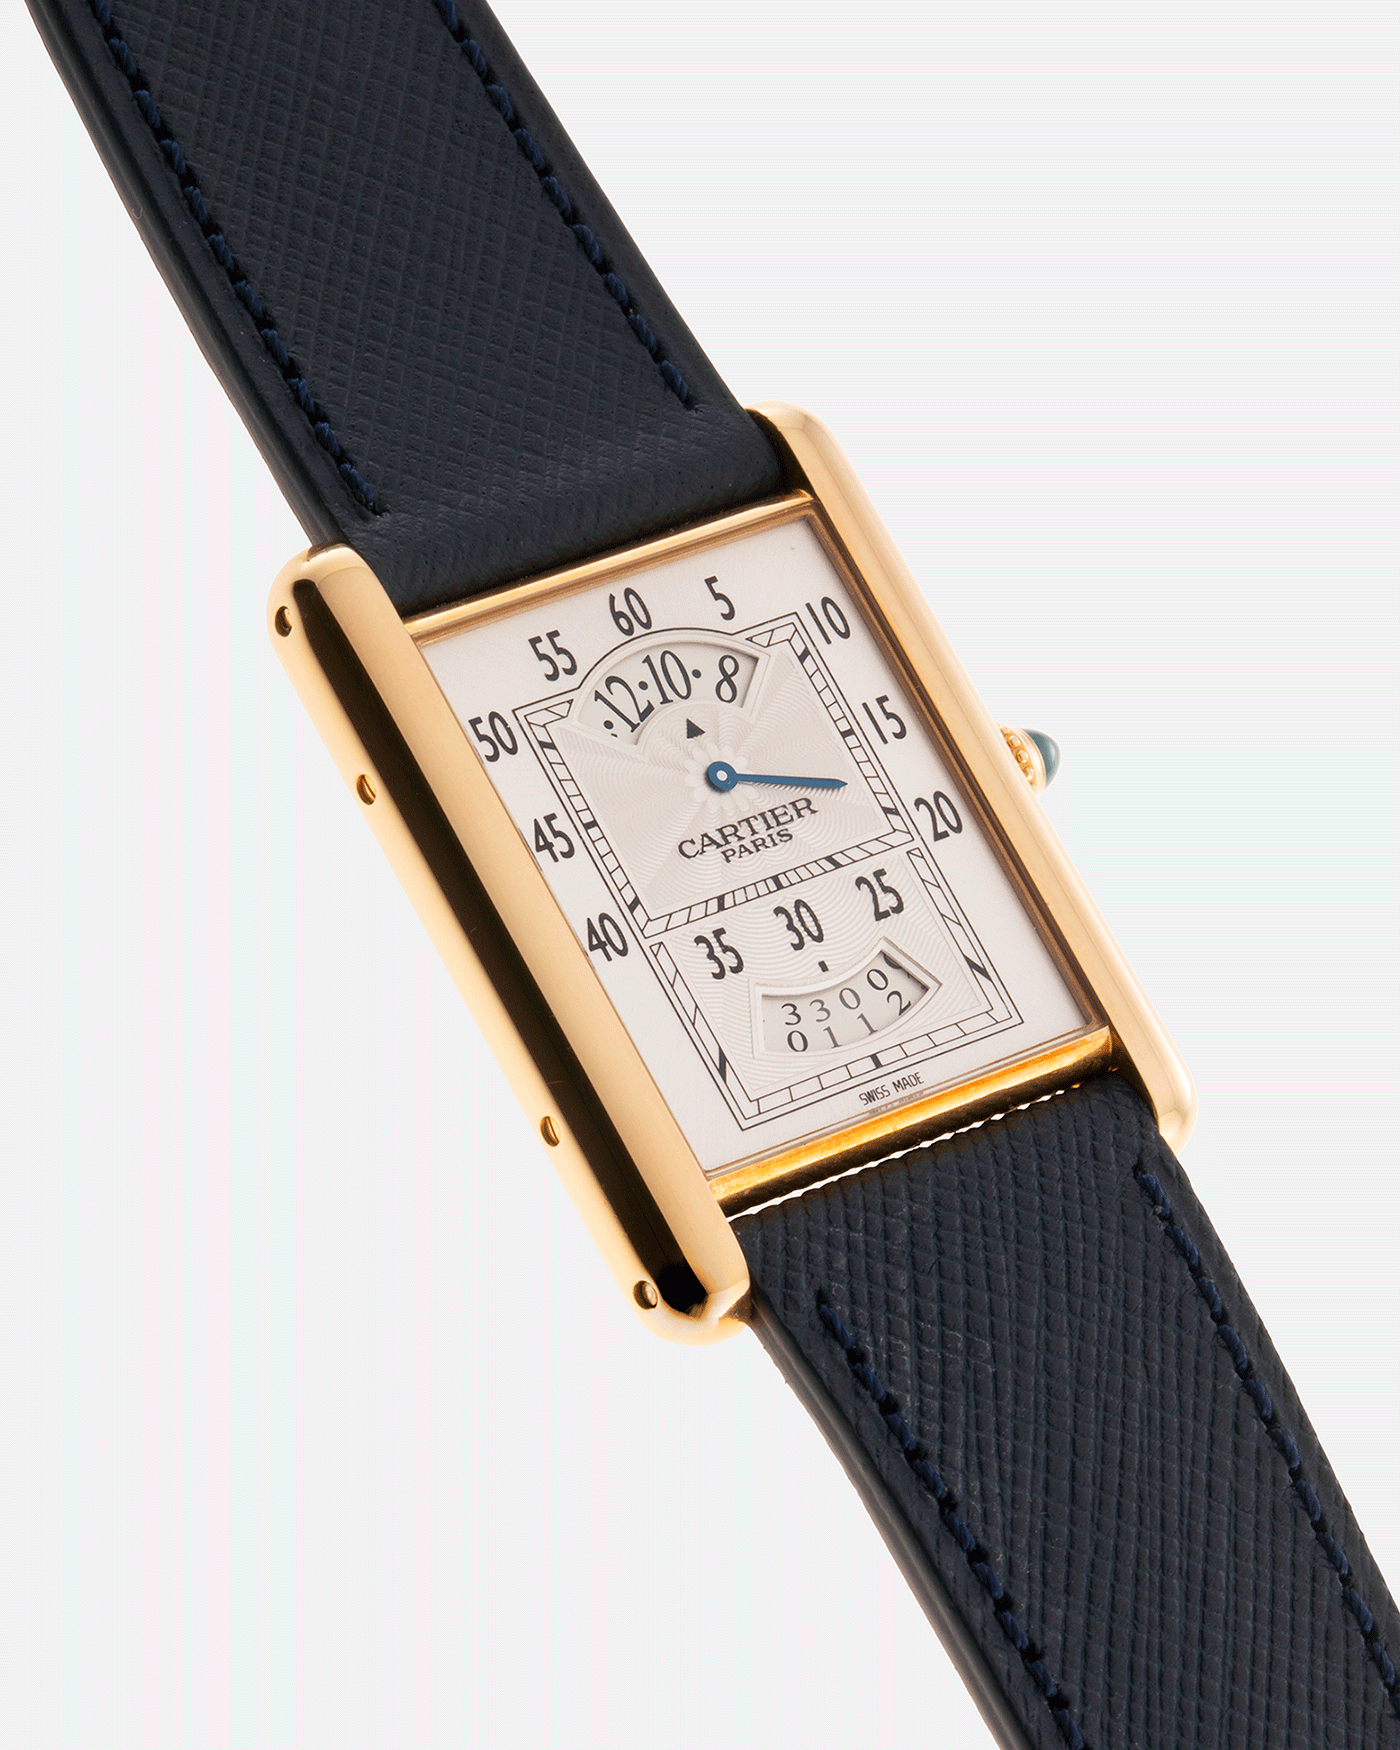 Brand: Cartier Year: 2005 Model: Collection Prive Tank Louis Cartier Wandering Hours Reference: 2918 Material: 18k Rose Gold Movement: Piaget-Based Manually Wound Cal. 9902 MC Case Diameter: 28mm width, 40.5mm lug to lug Strap: Navy Blue Molequin Textured Calf Strap with separate 18k Cartier Rose Gold Deployant